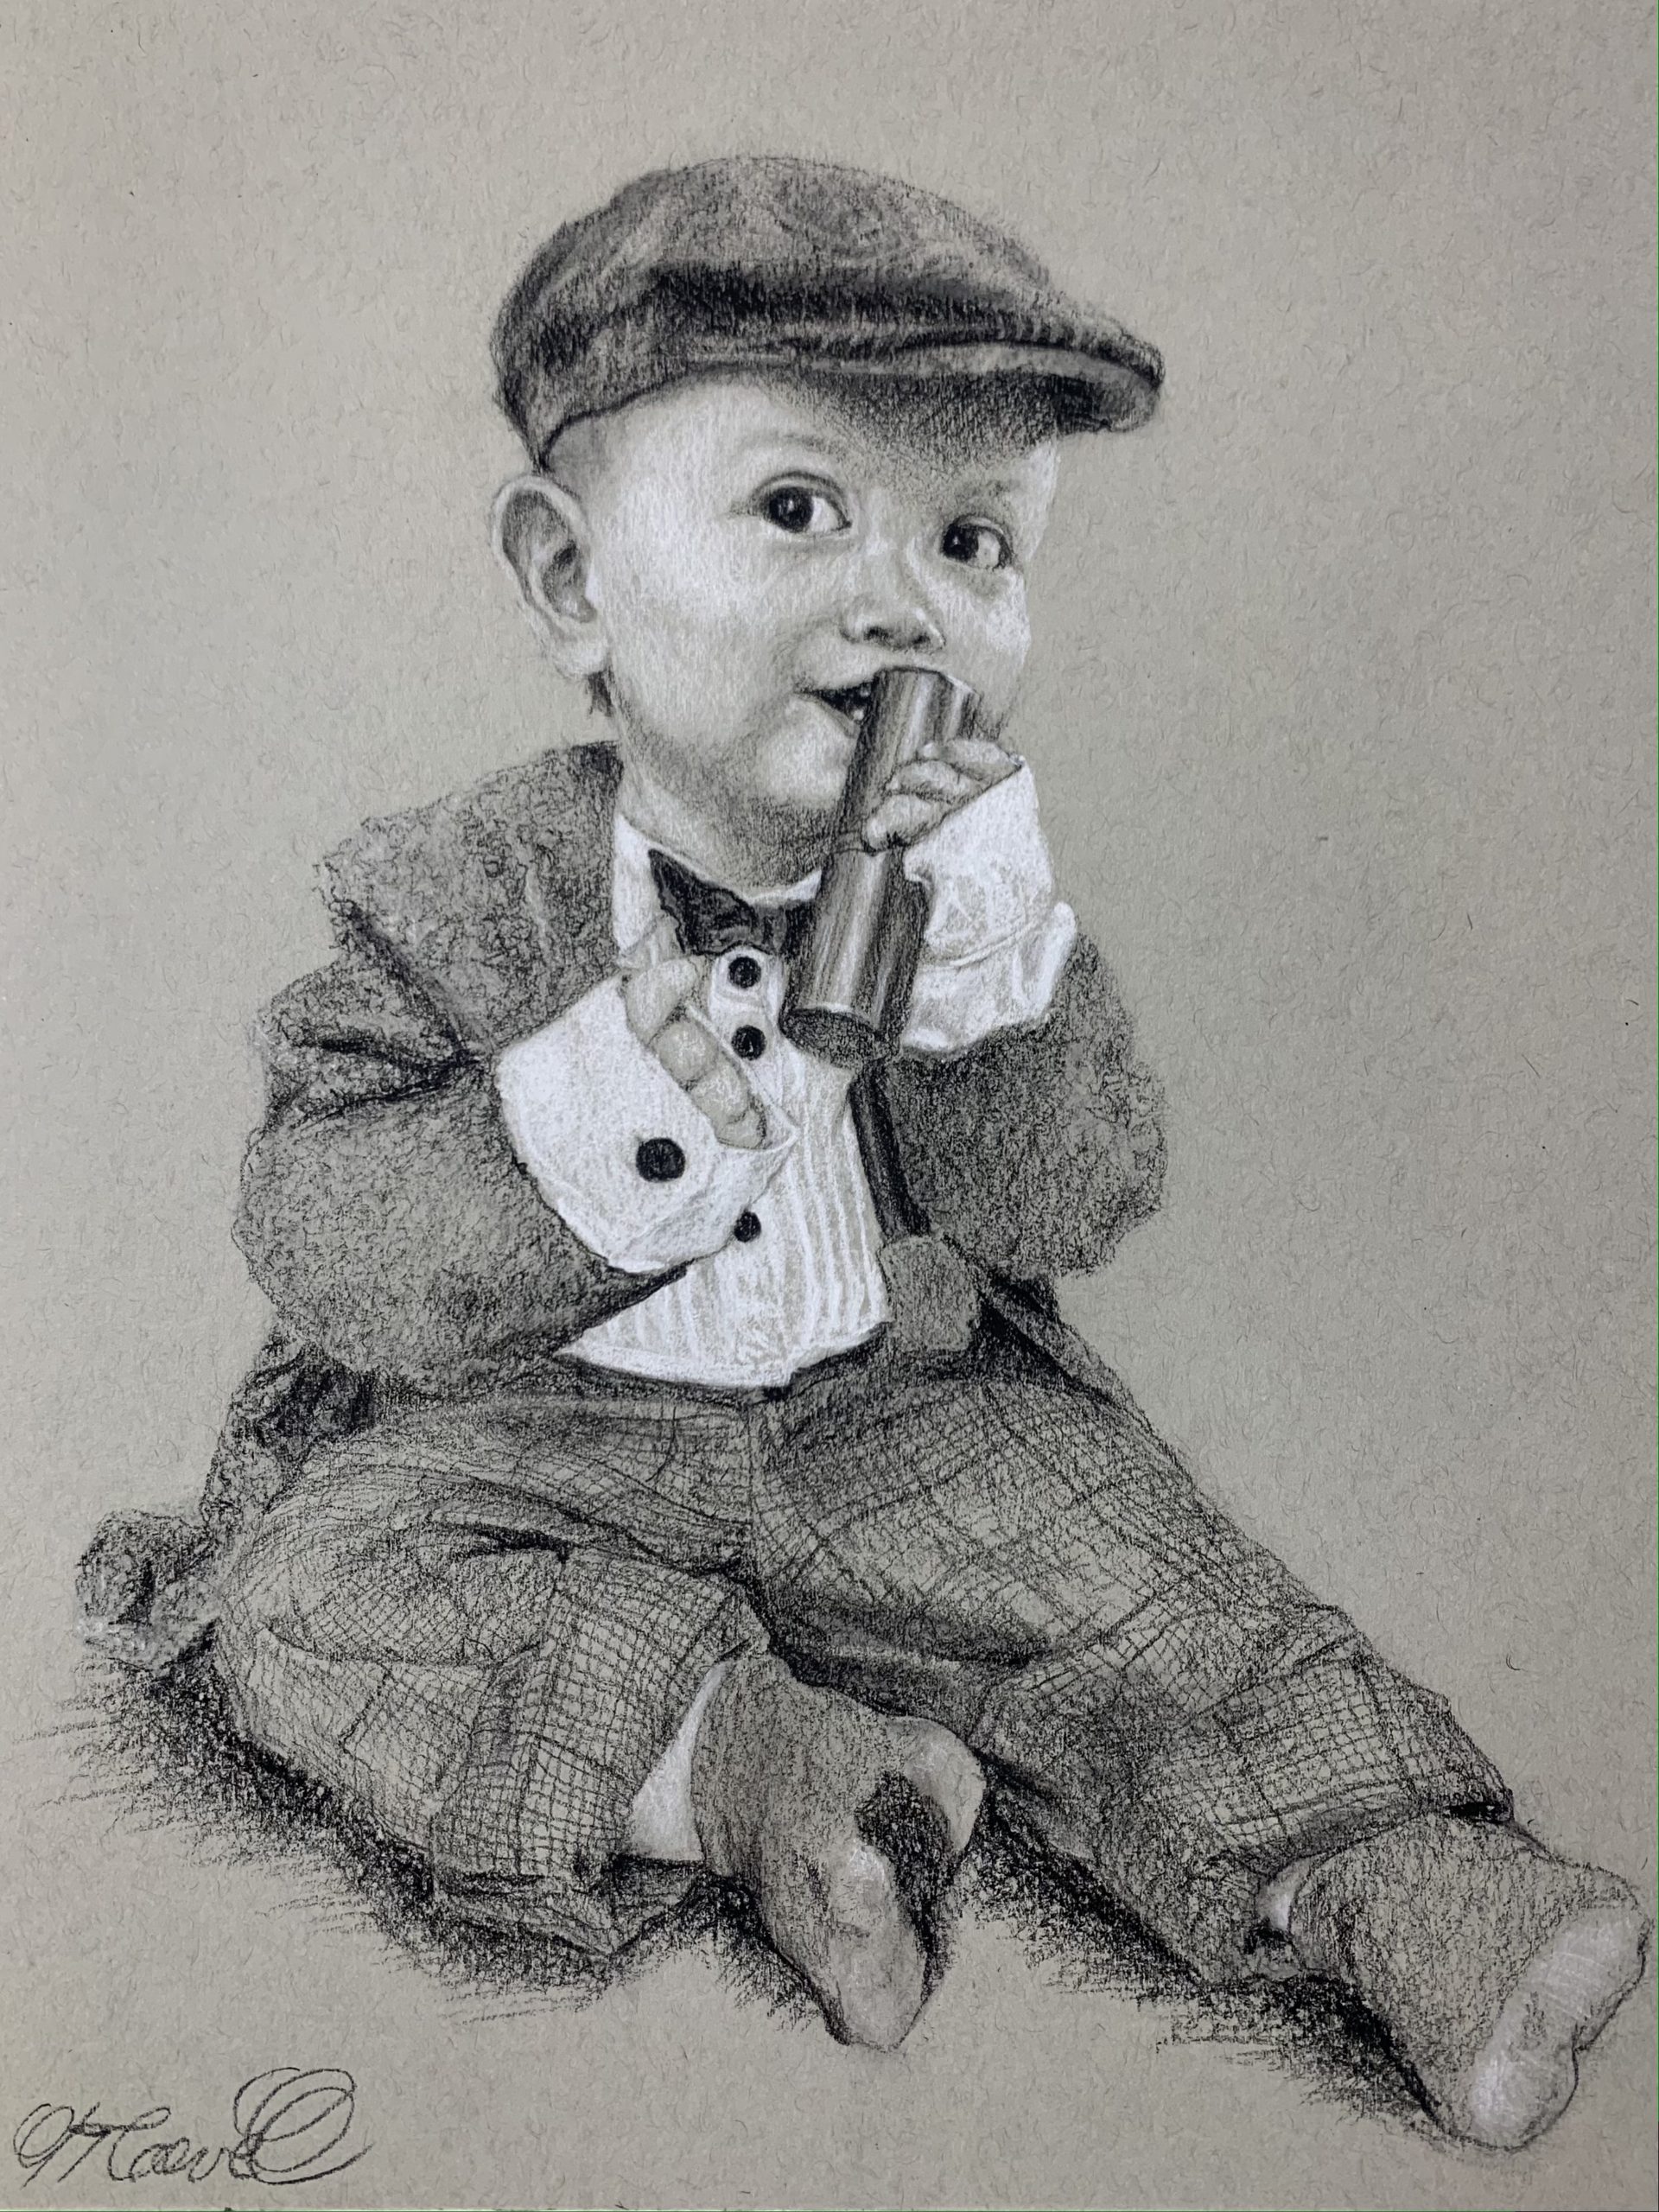 a painting of a baby in a suit sitting down